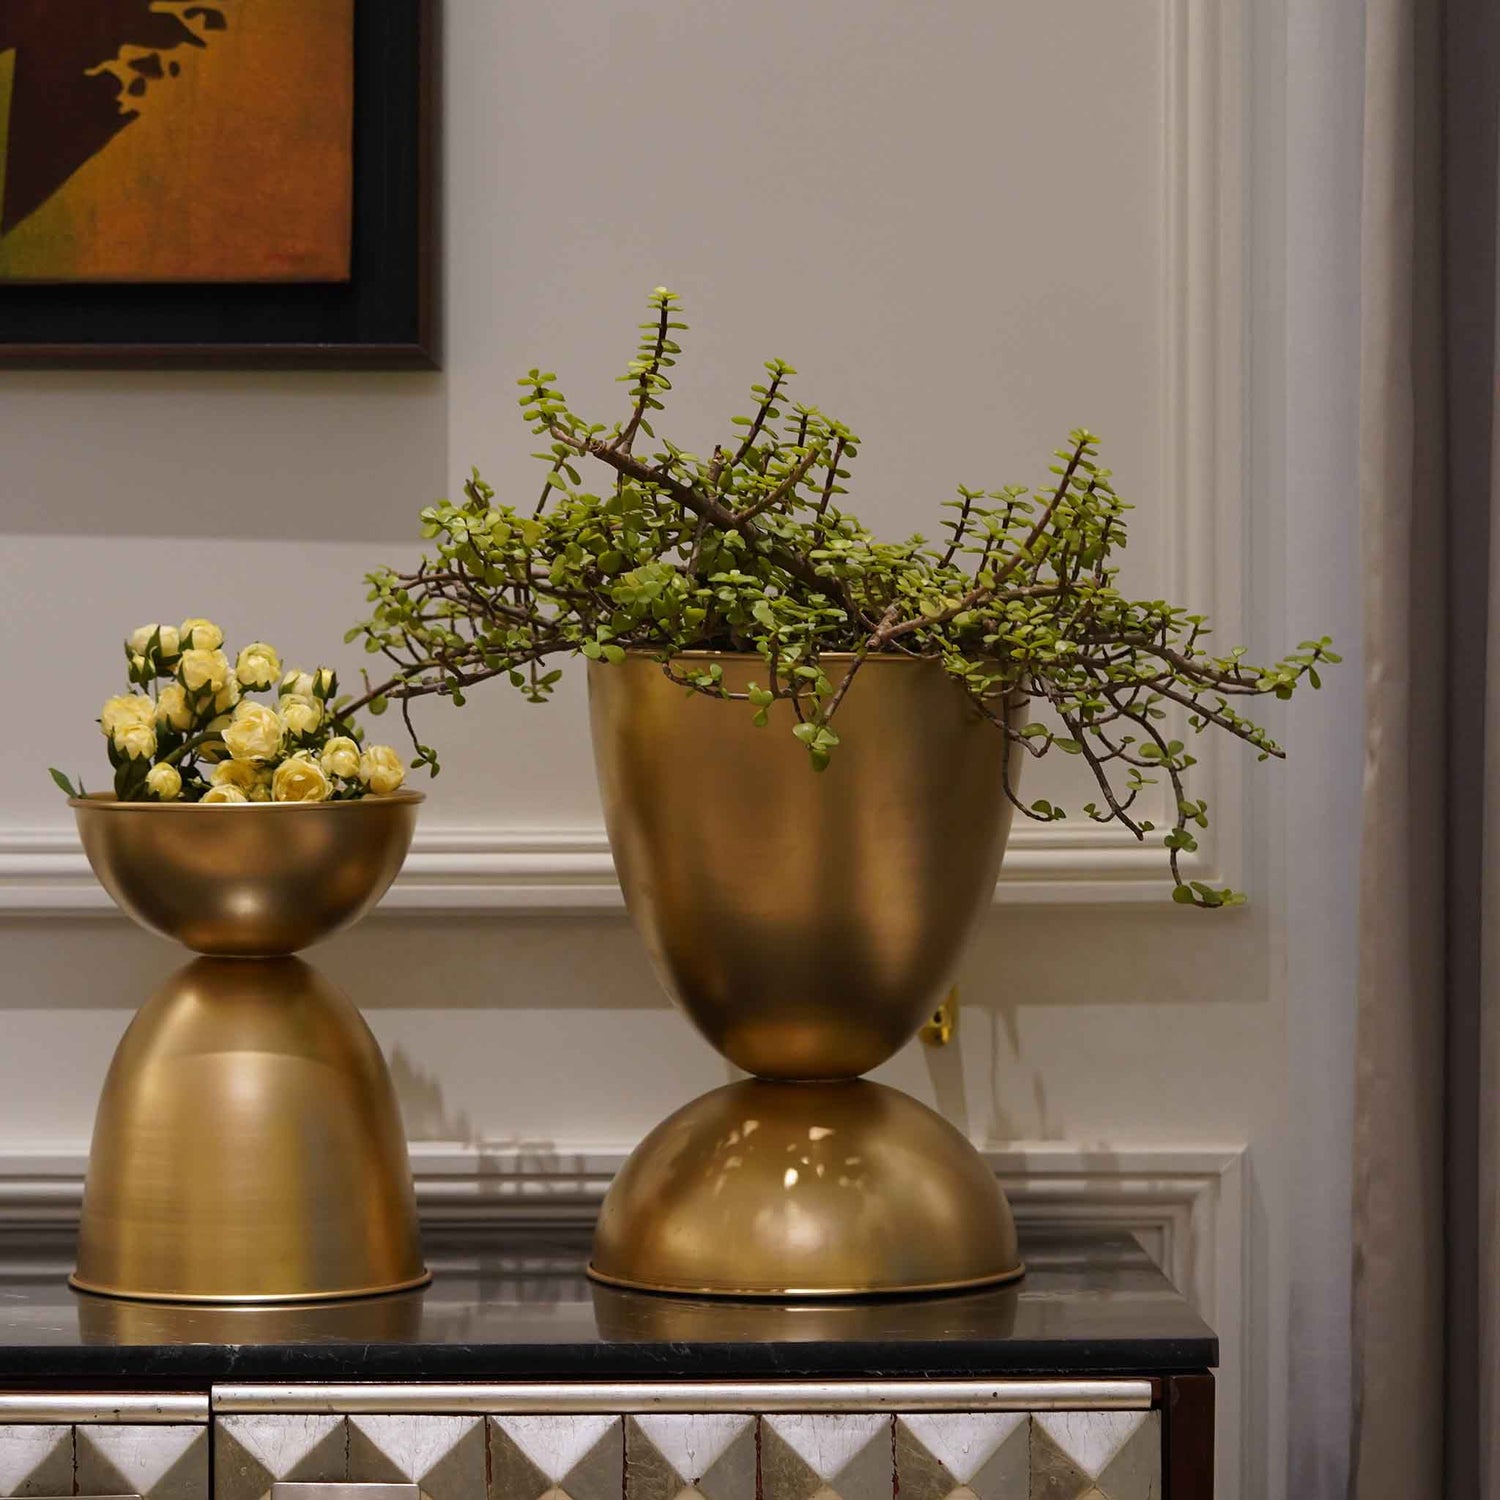 Set of 2 large planters in golden color.